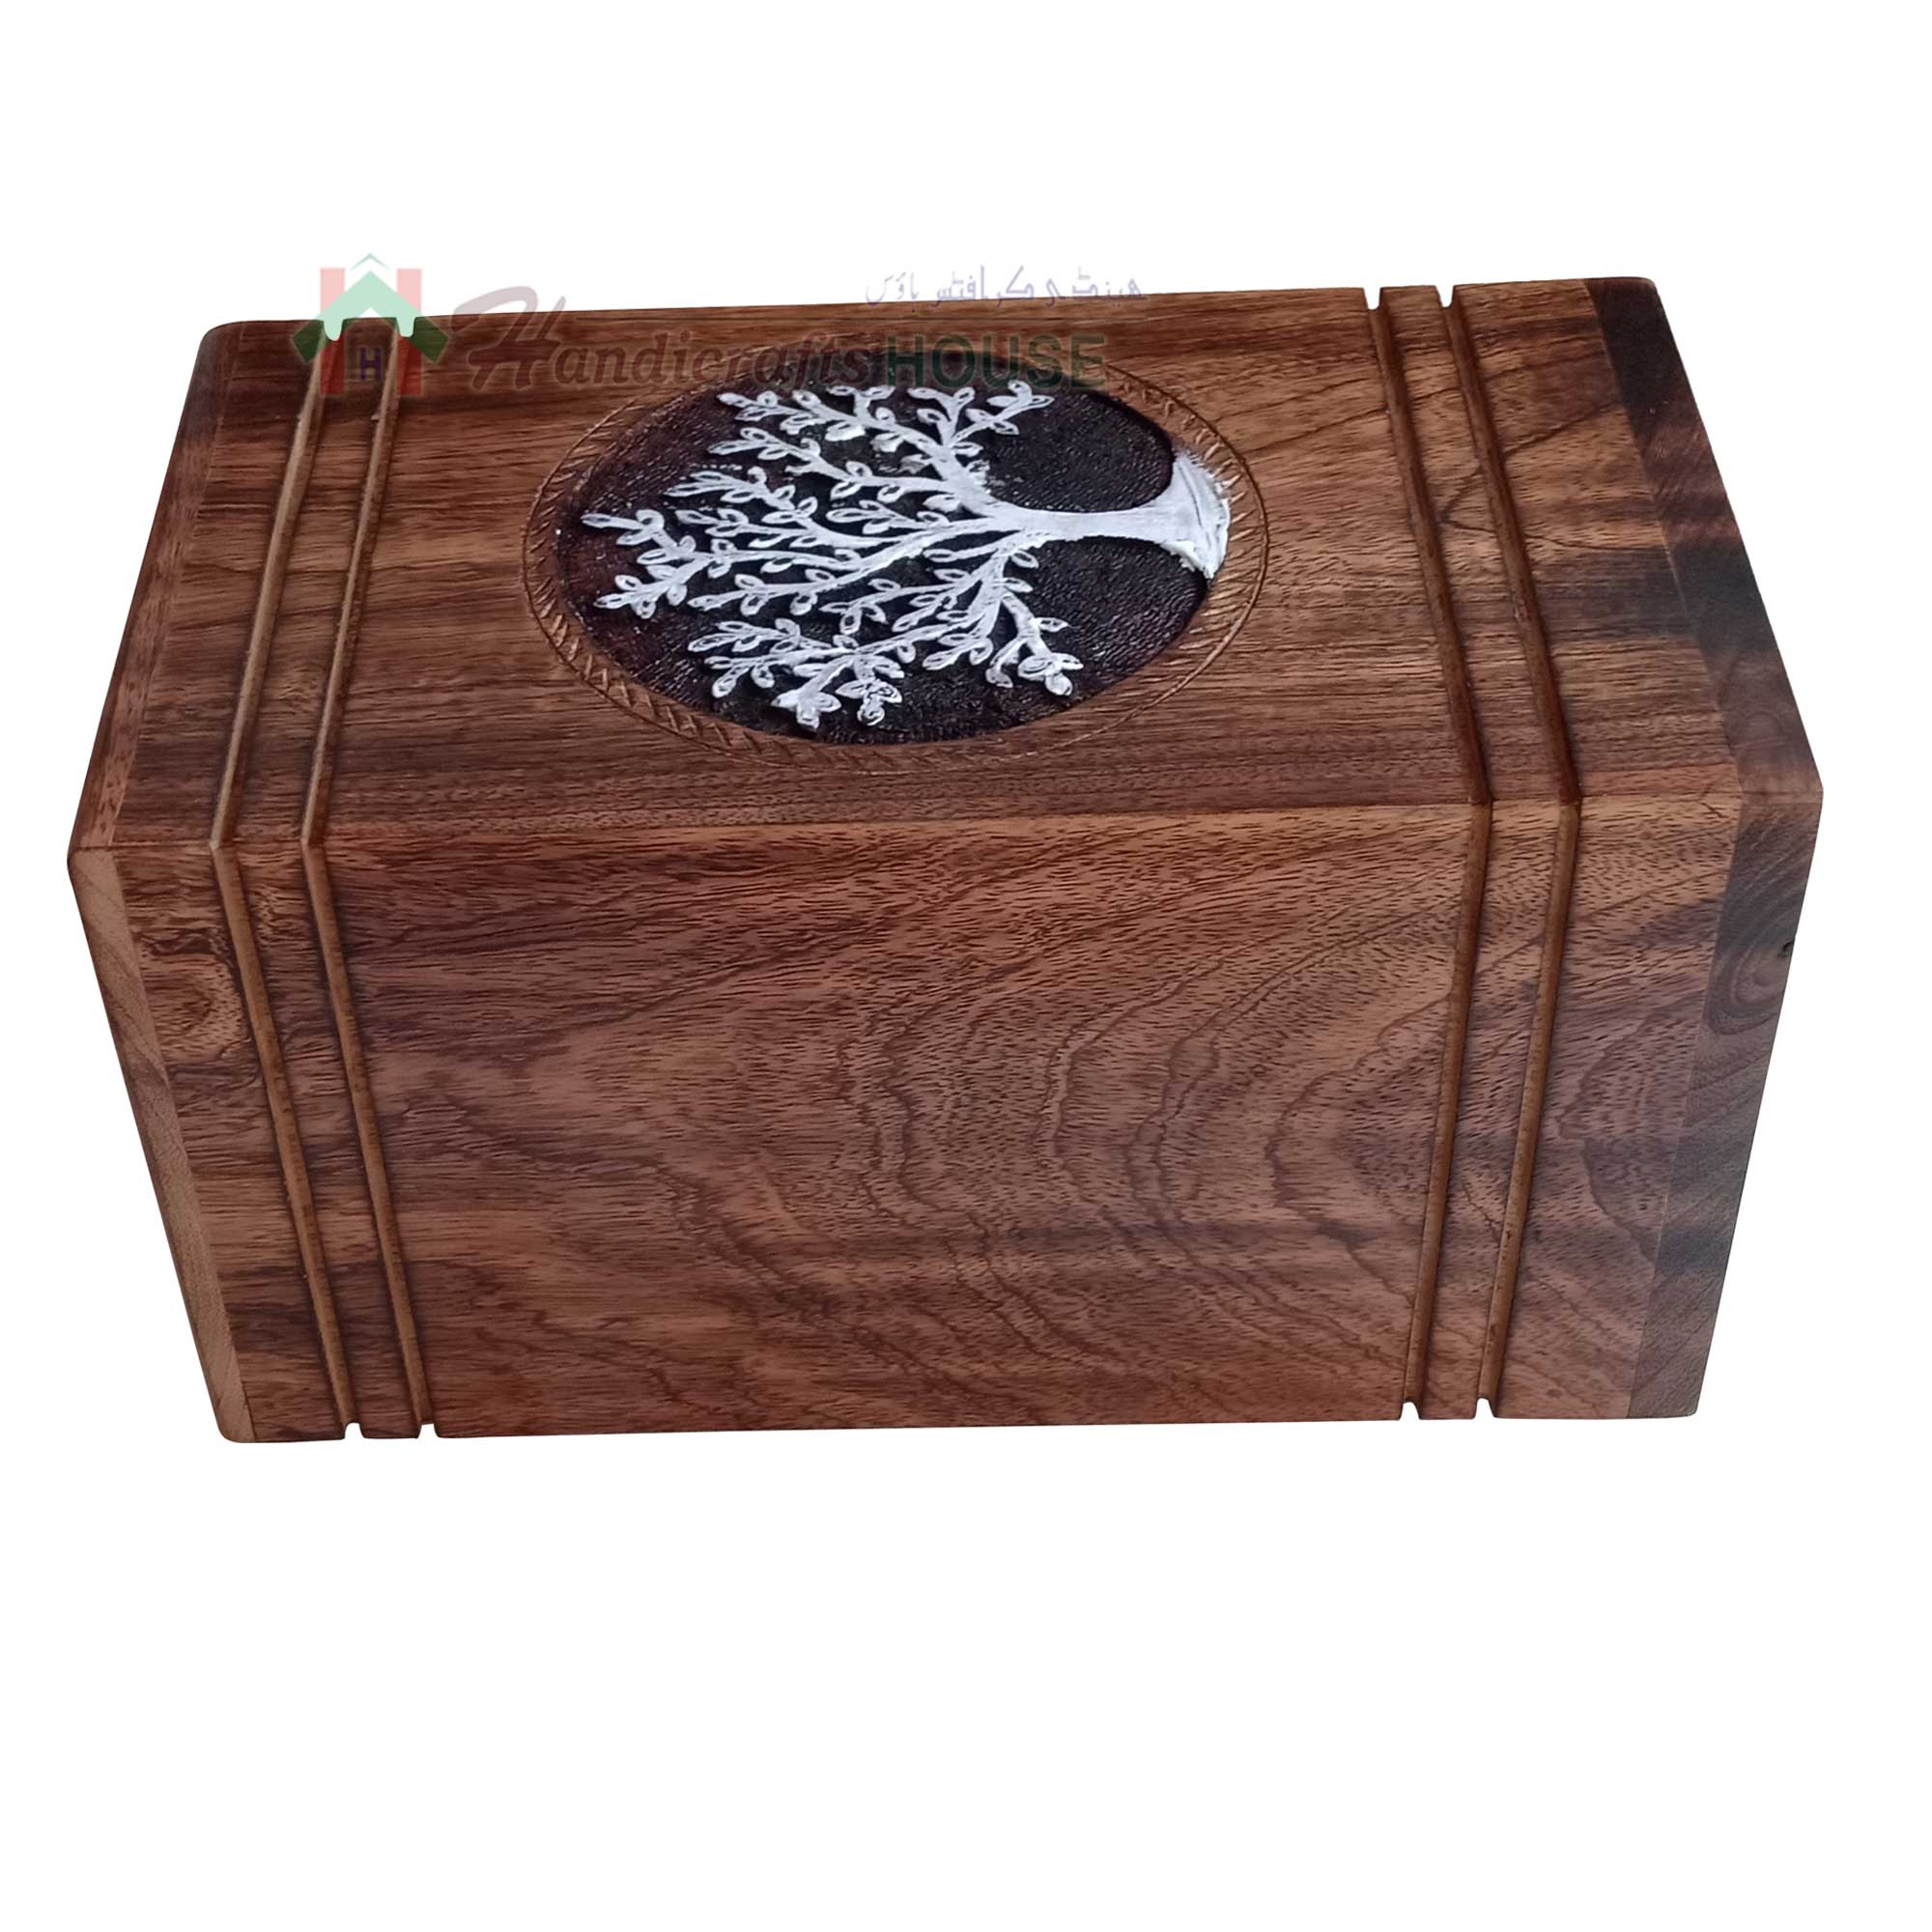 Large Wooden Cremation Urns for Human Ashes Adult Funeral Cremation Urn for Pets 